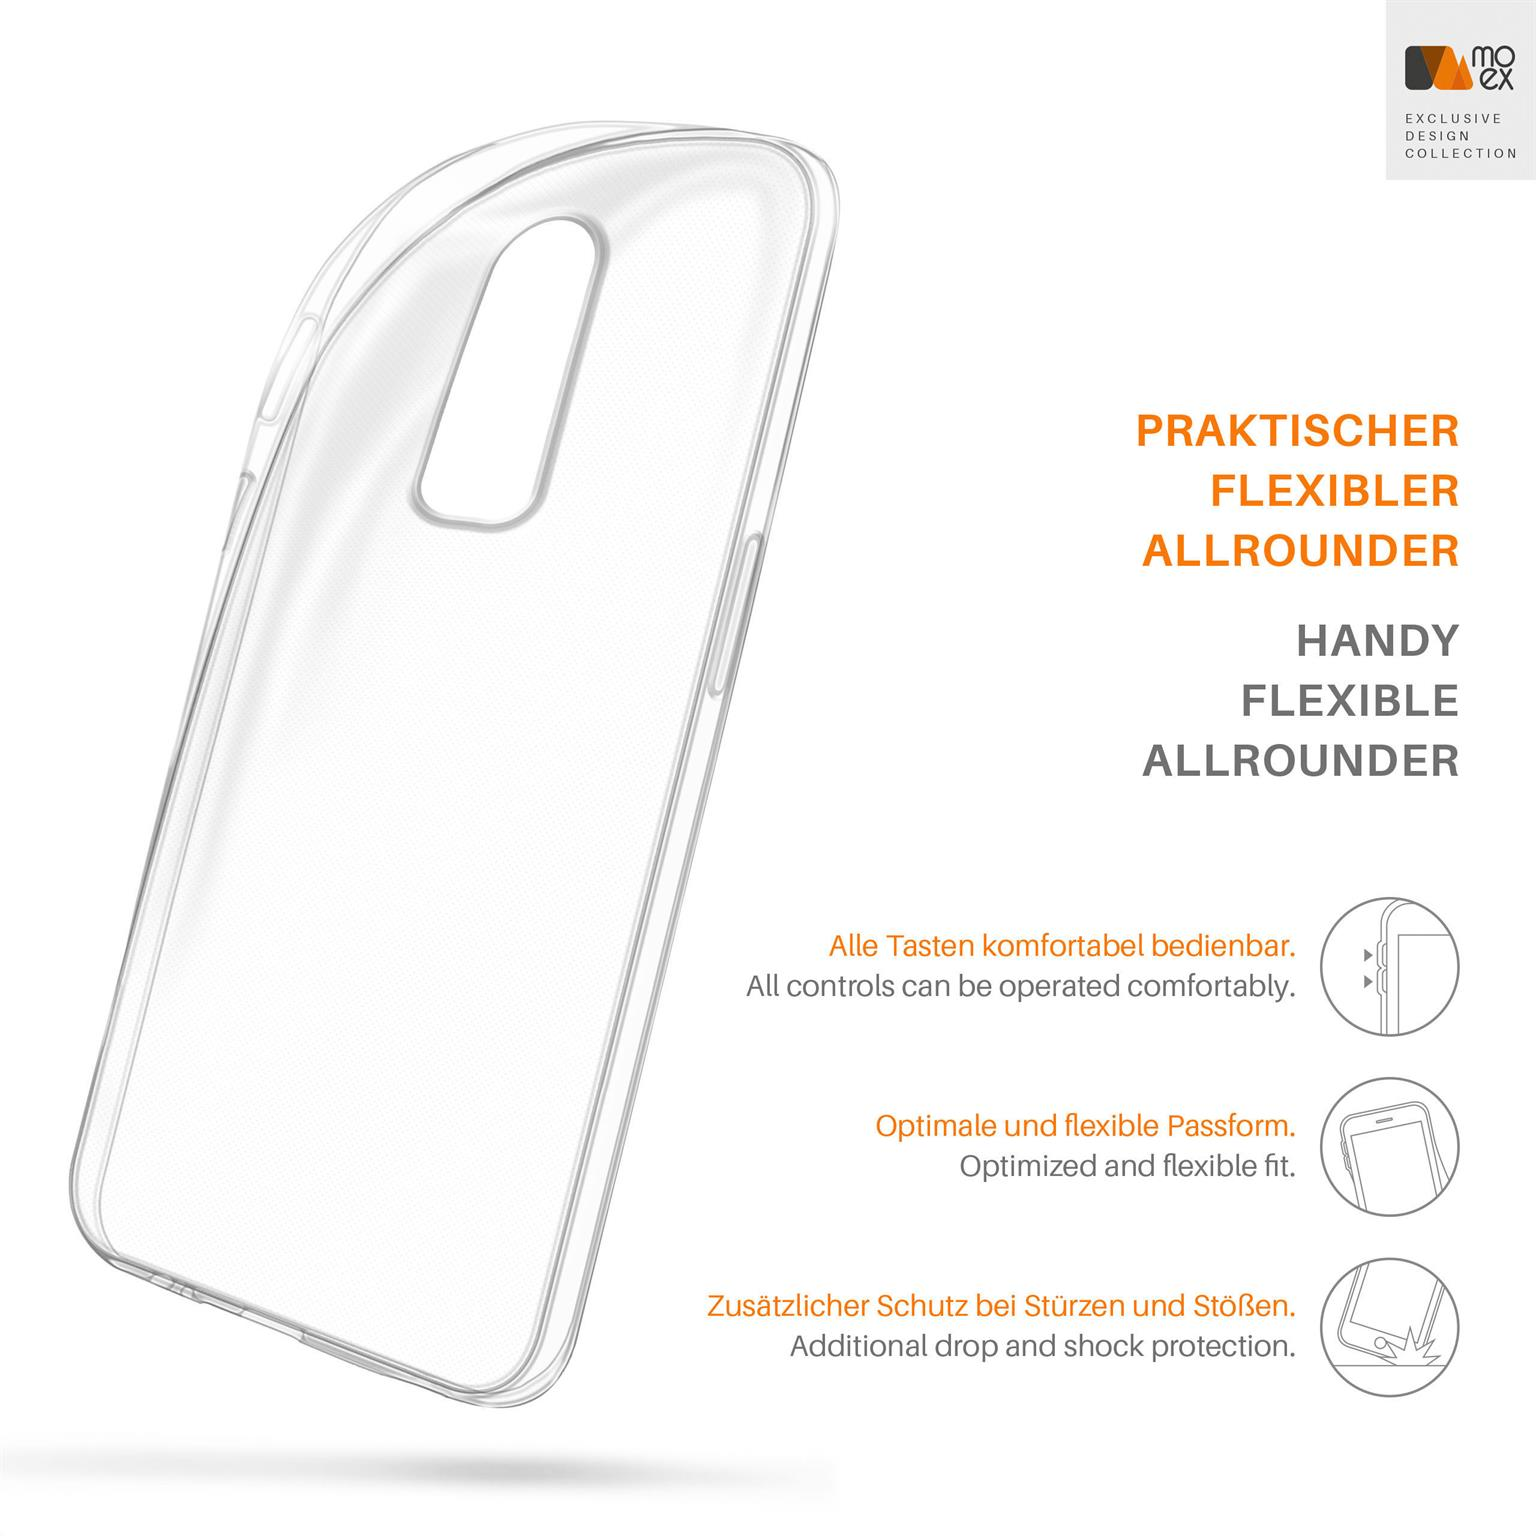 6T, OnePlus, Case, Aero Backcover, MOEX Crystal-Clear